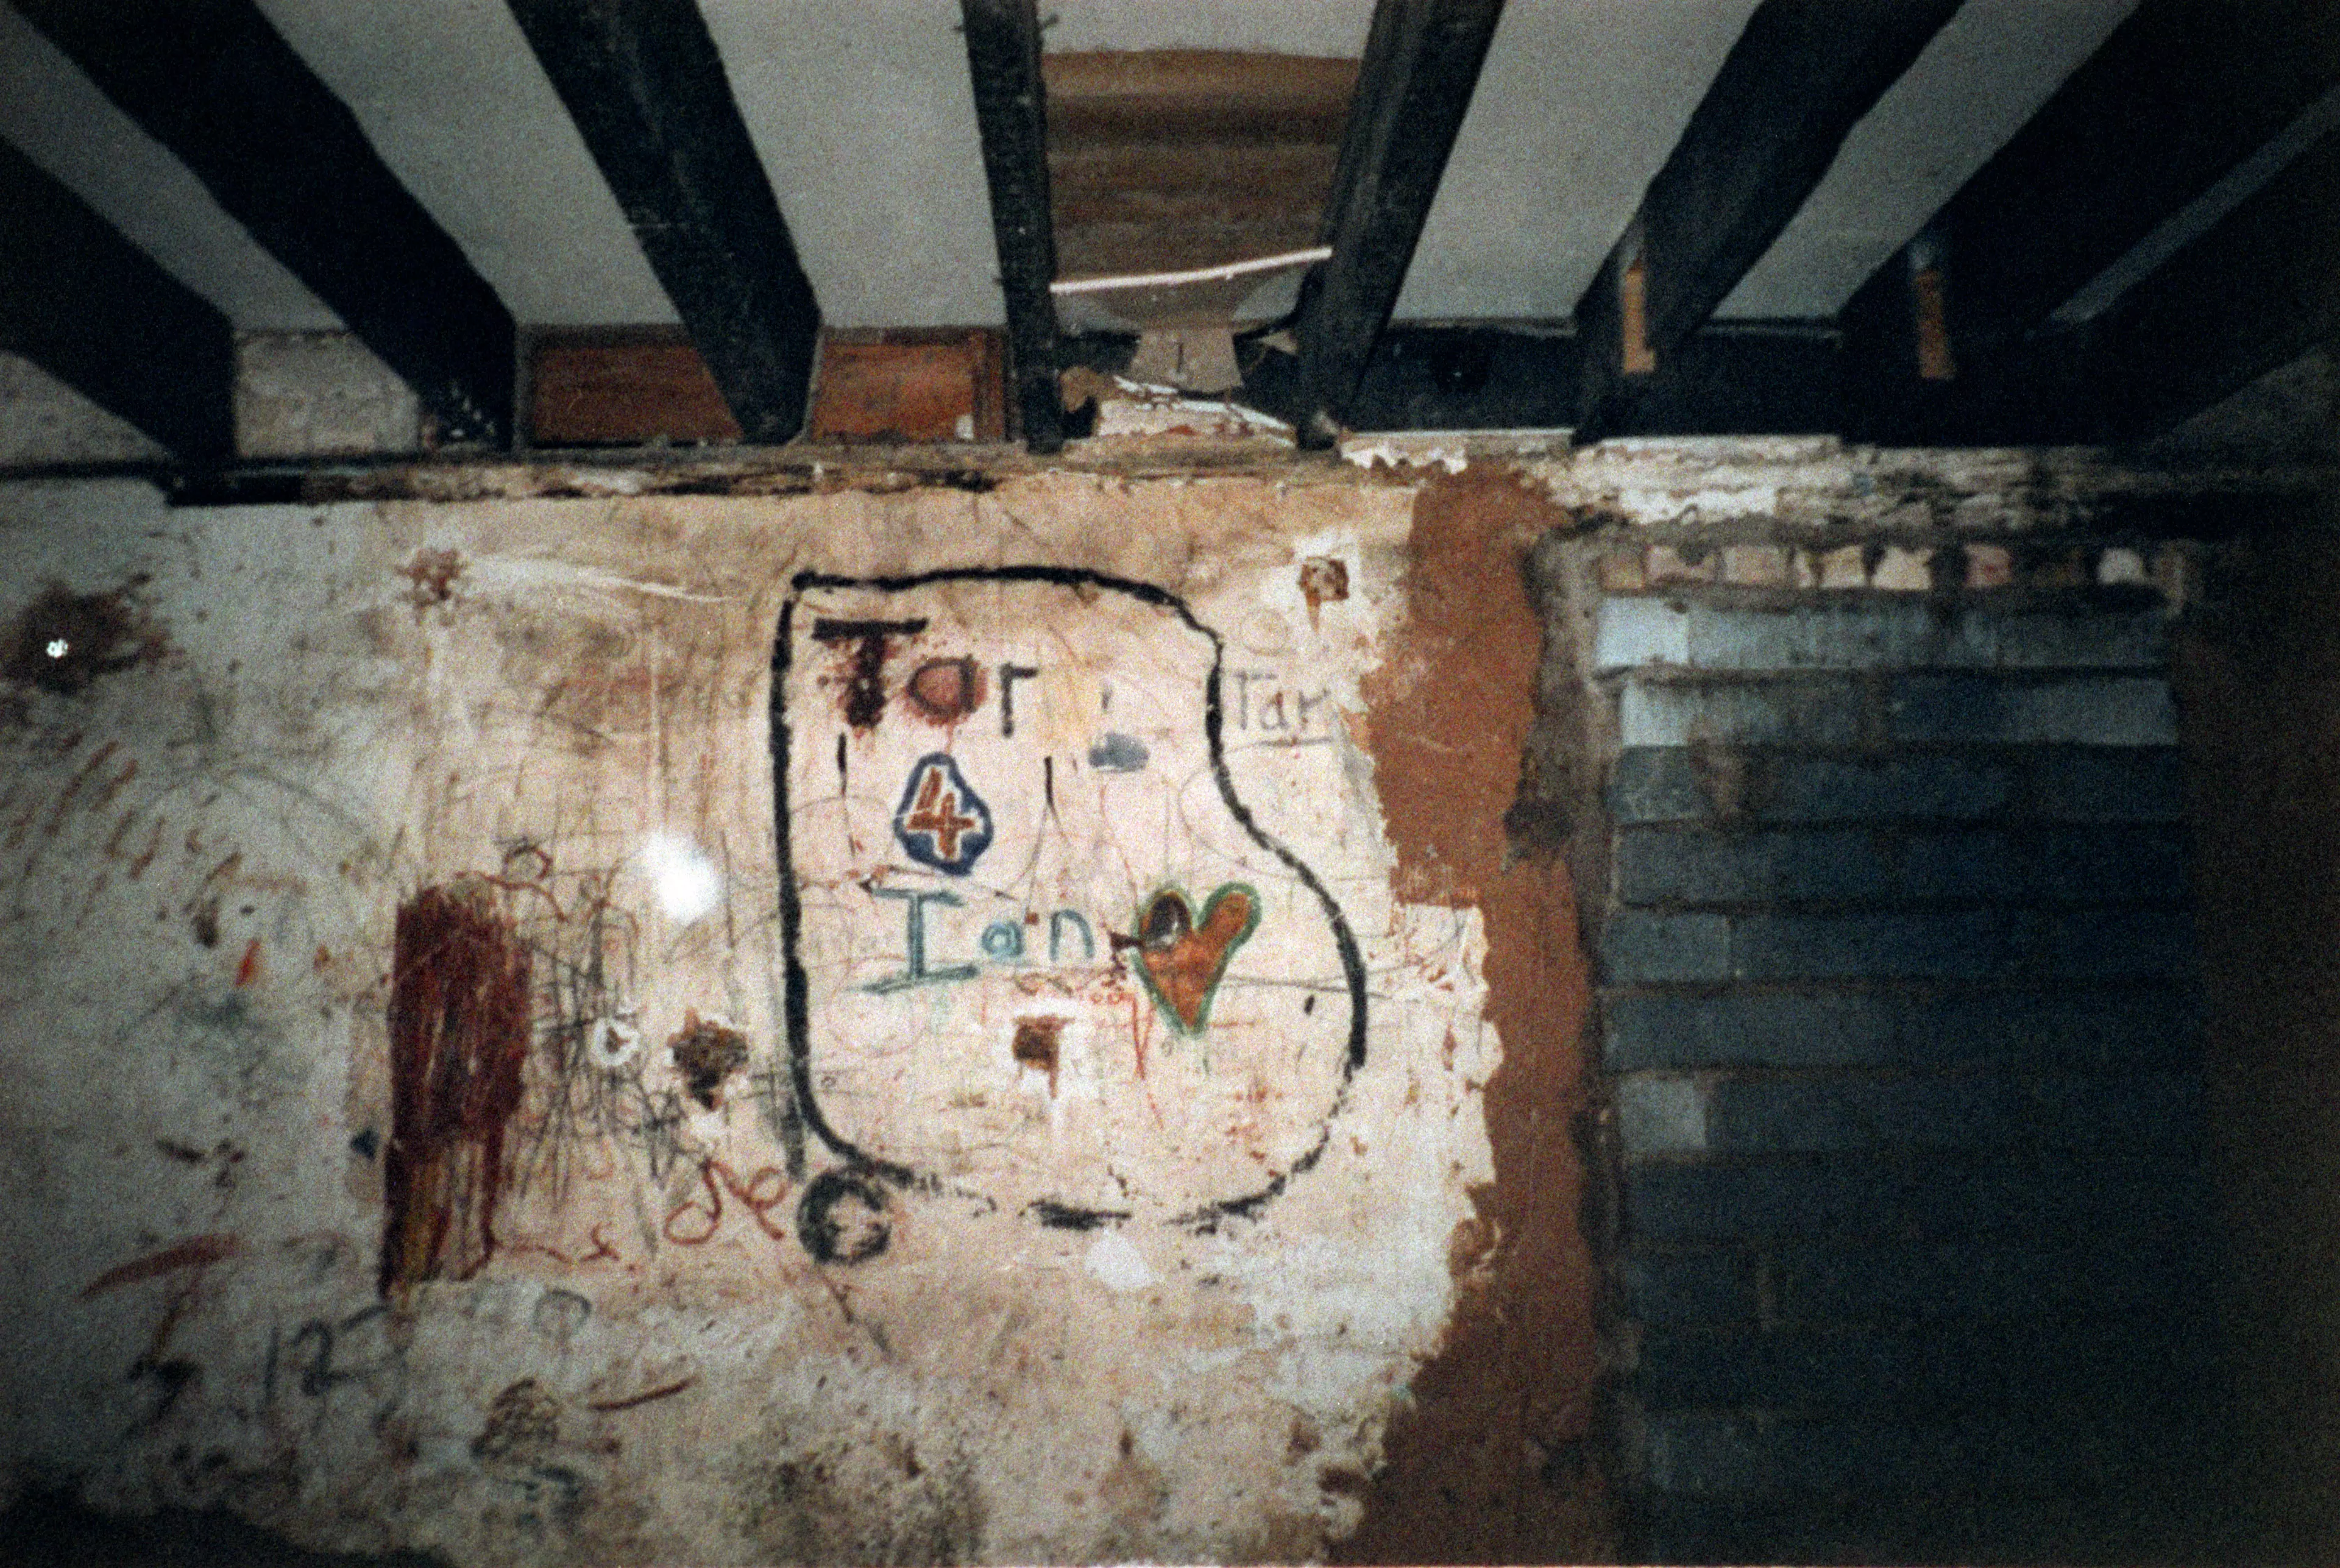 The basement of the West's home on Cromwell Street, in Gloucester.